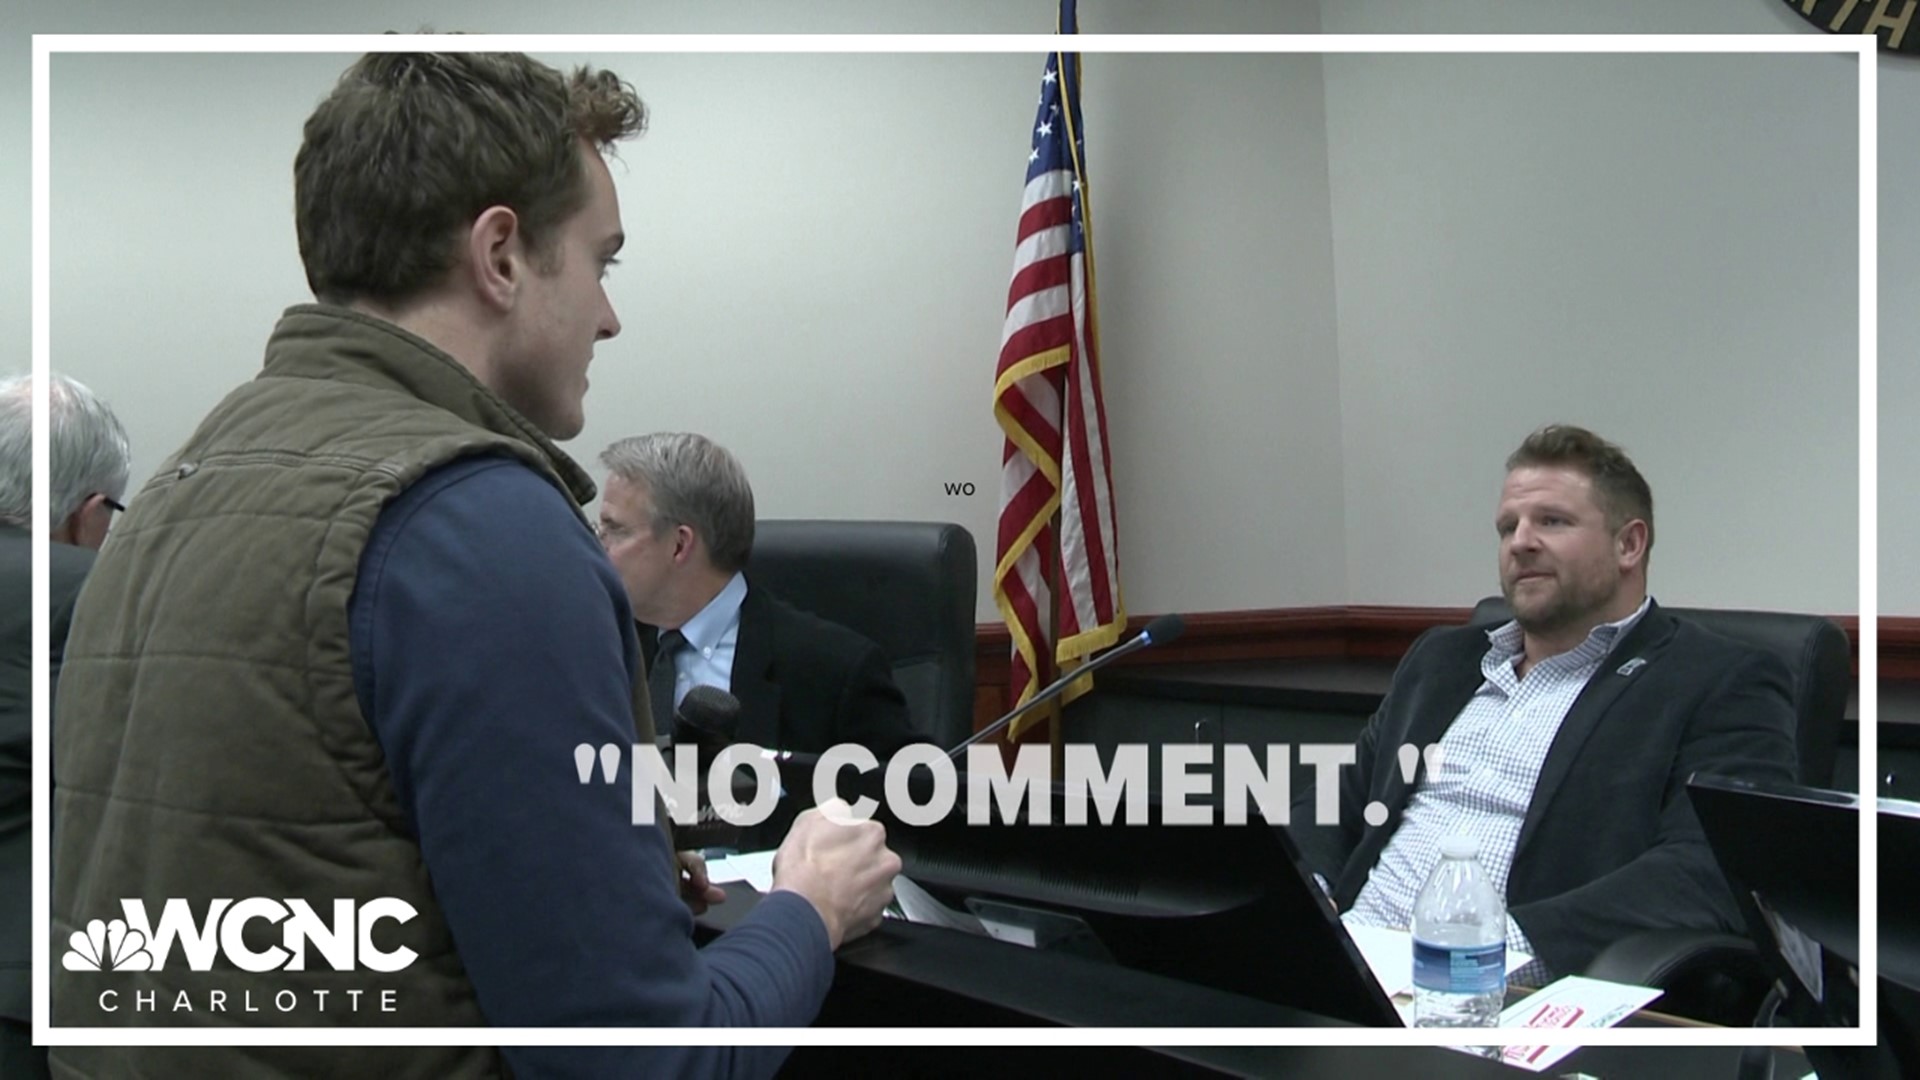 People in Monroe are questioning the city's mayor after making comments on Facebook that some call disrespectful.